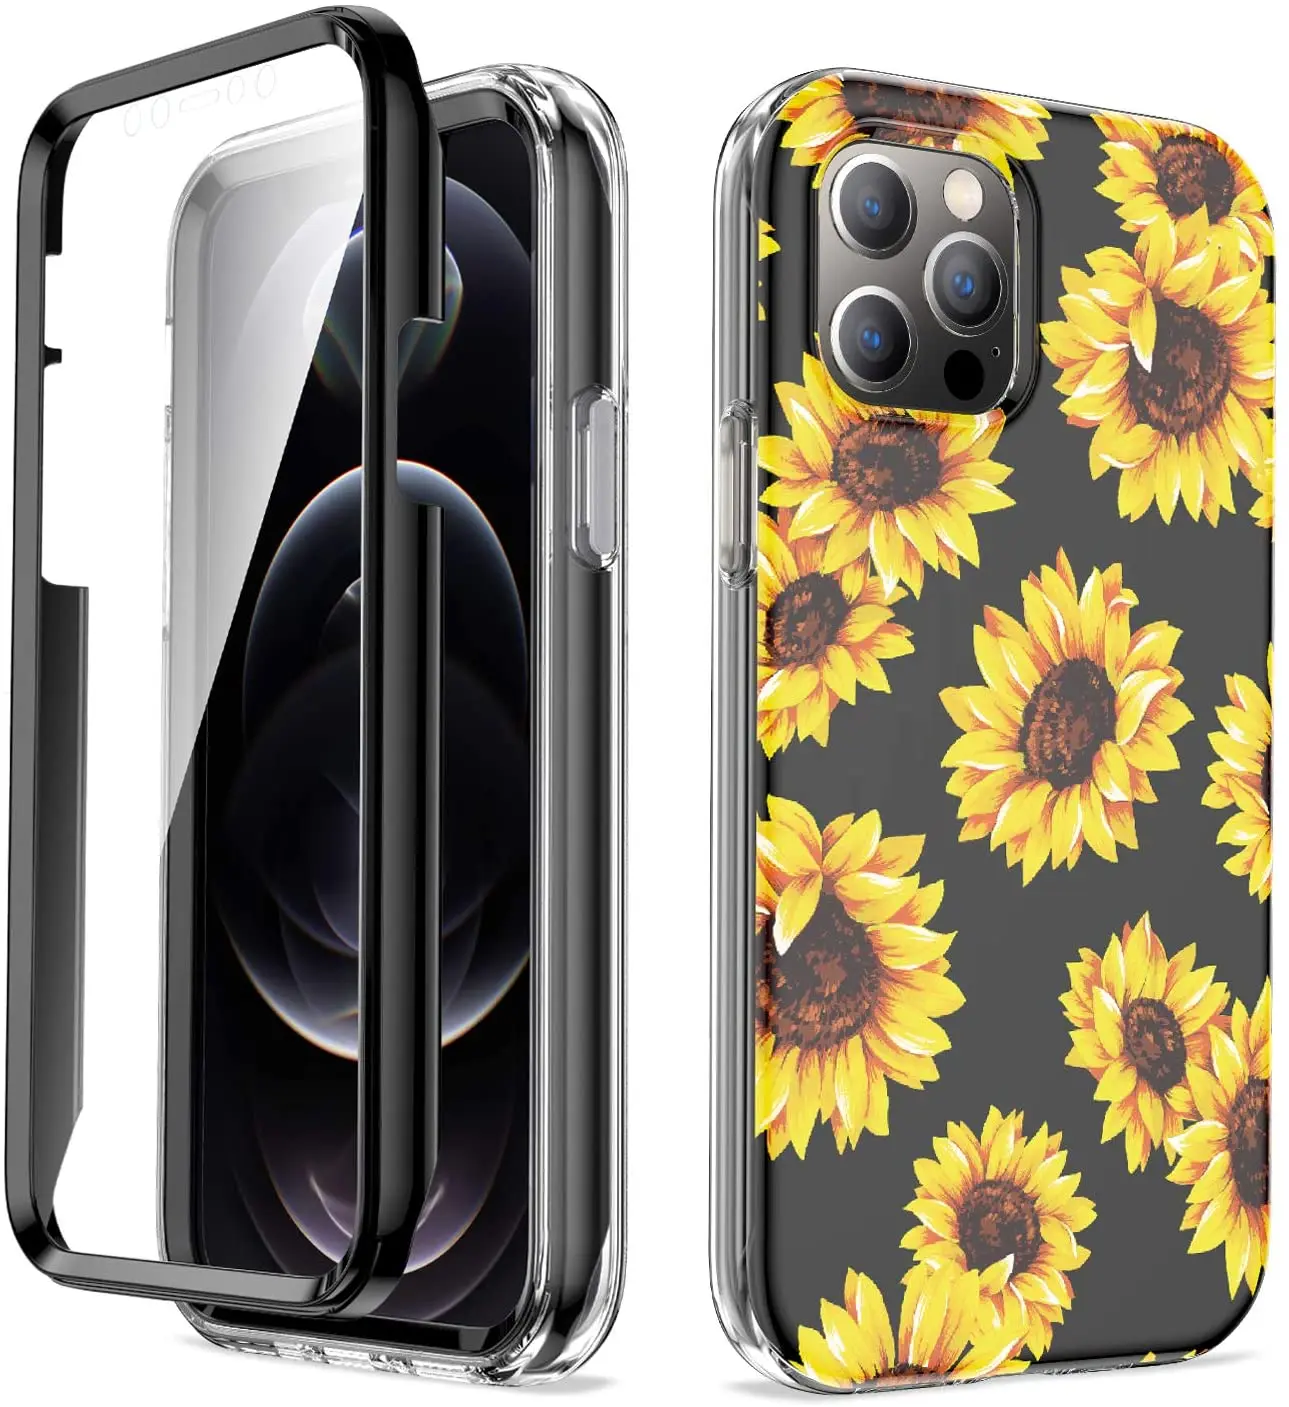 For iPhone 12 Mini 11 Pro XS Max XR X 8 Plus SE Full-Body Sunflower Leopard Marble Bumper Case Cover Built-in Screen Protector